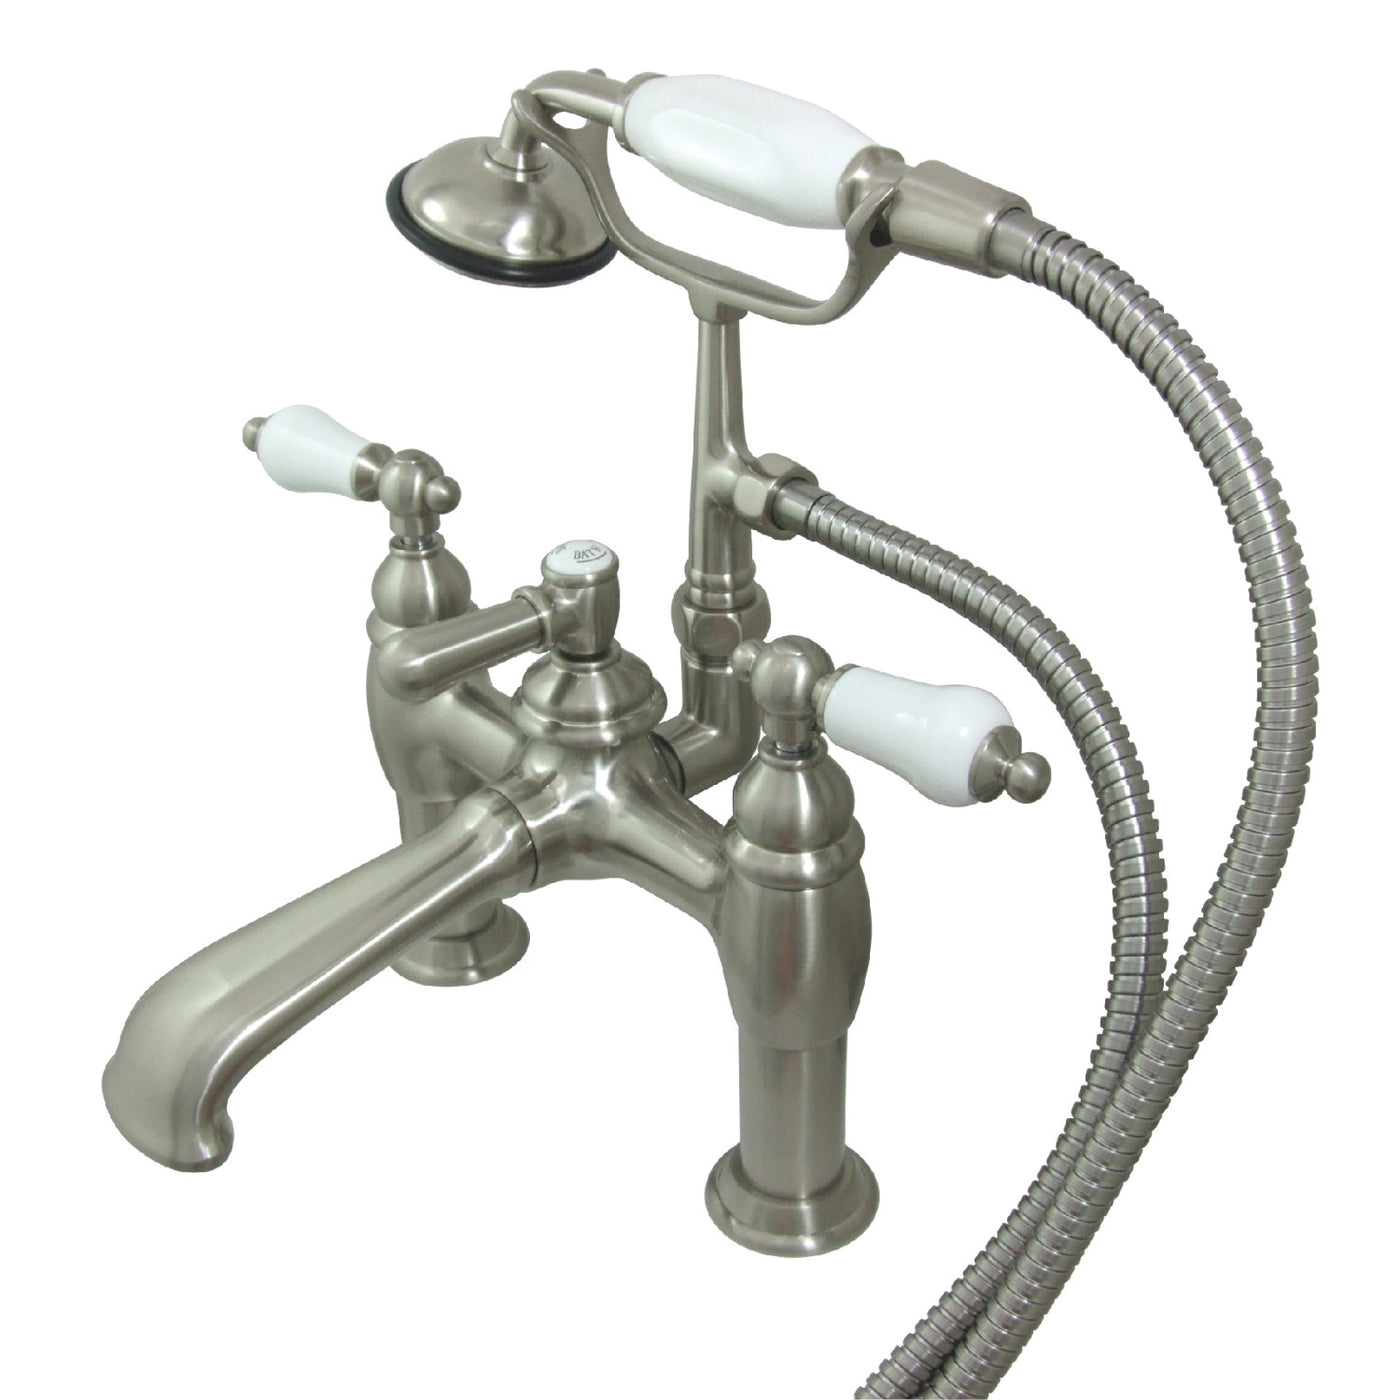 Elements of Design DT6038PL 7-Inch Deck Mount Tub Faucet with Hand Shower, Brushed Nickel